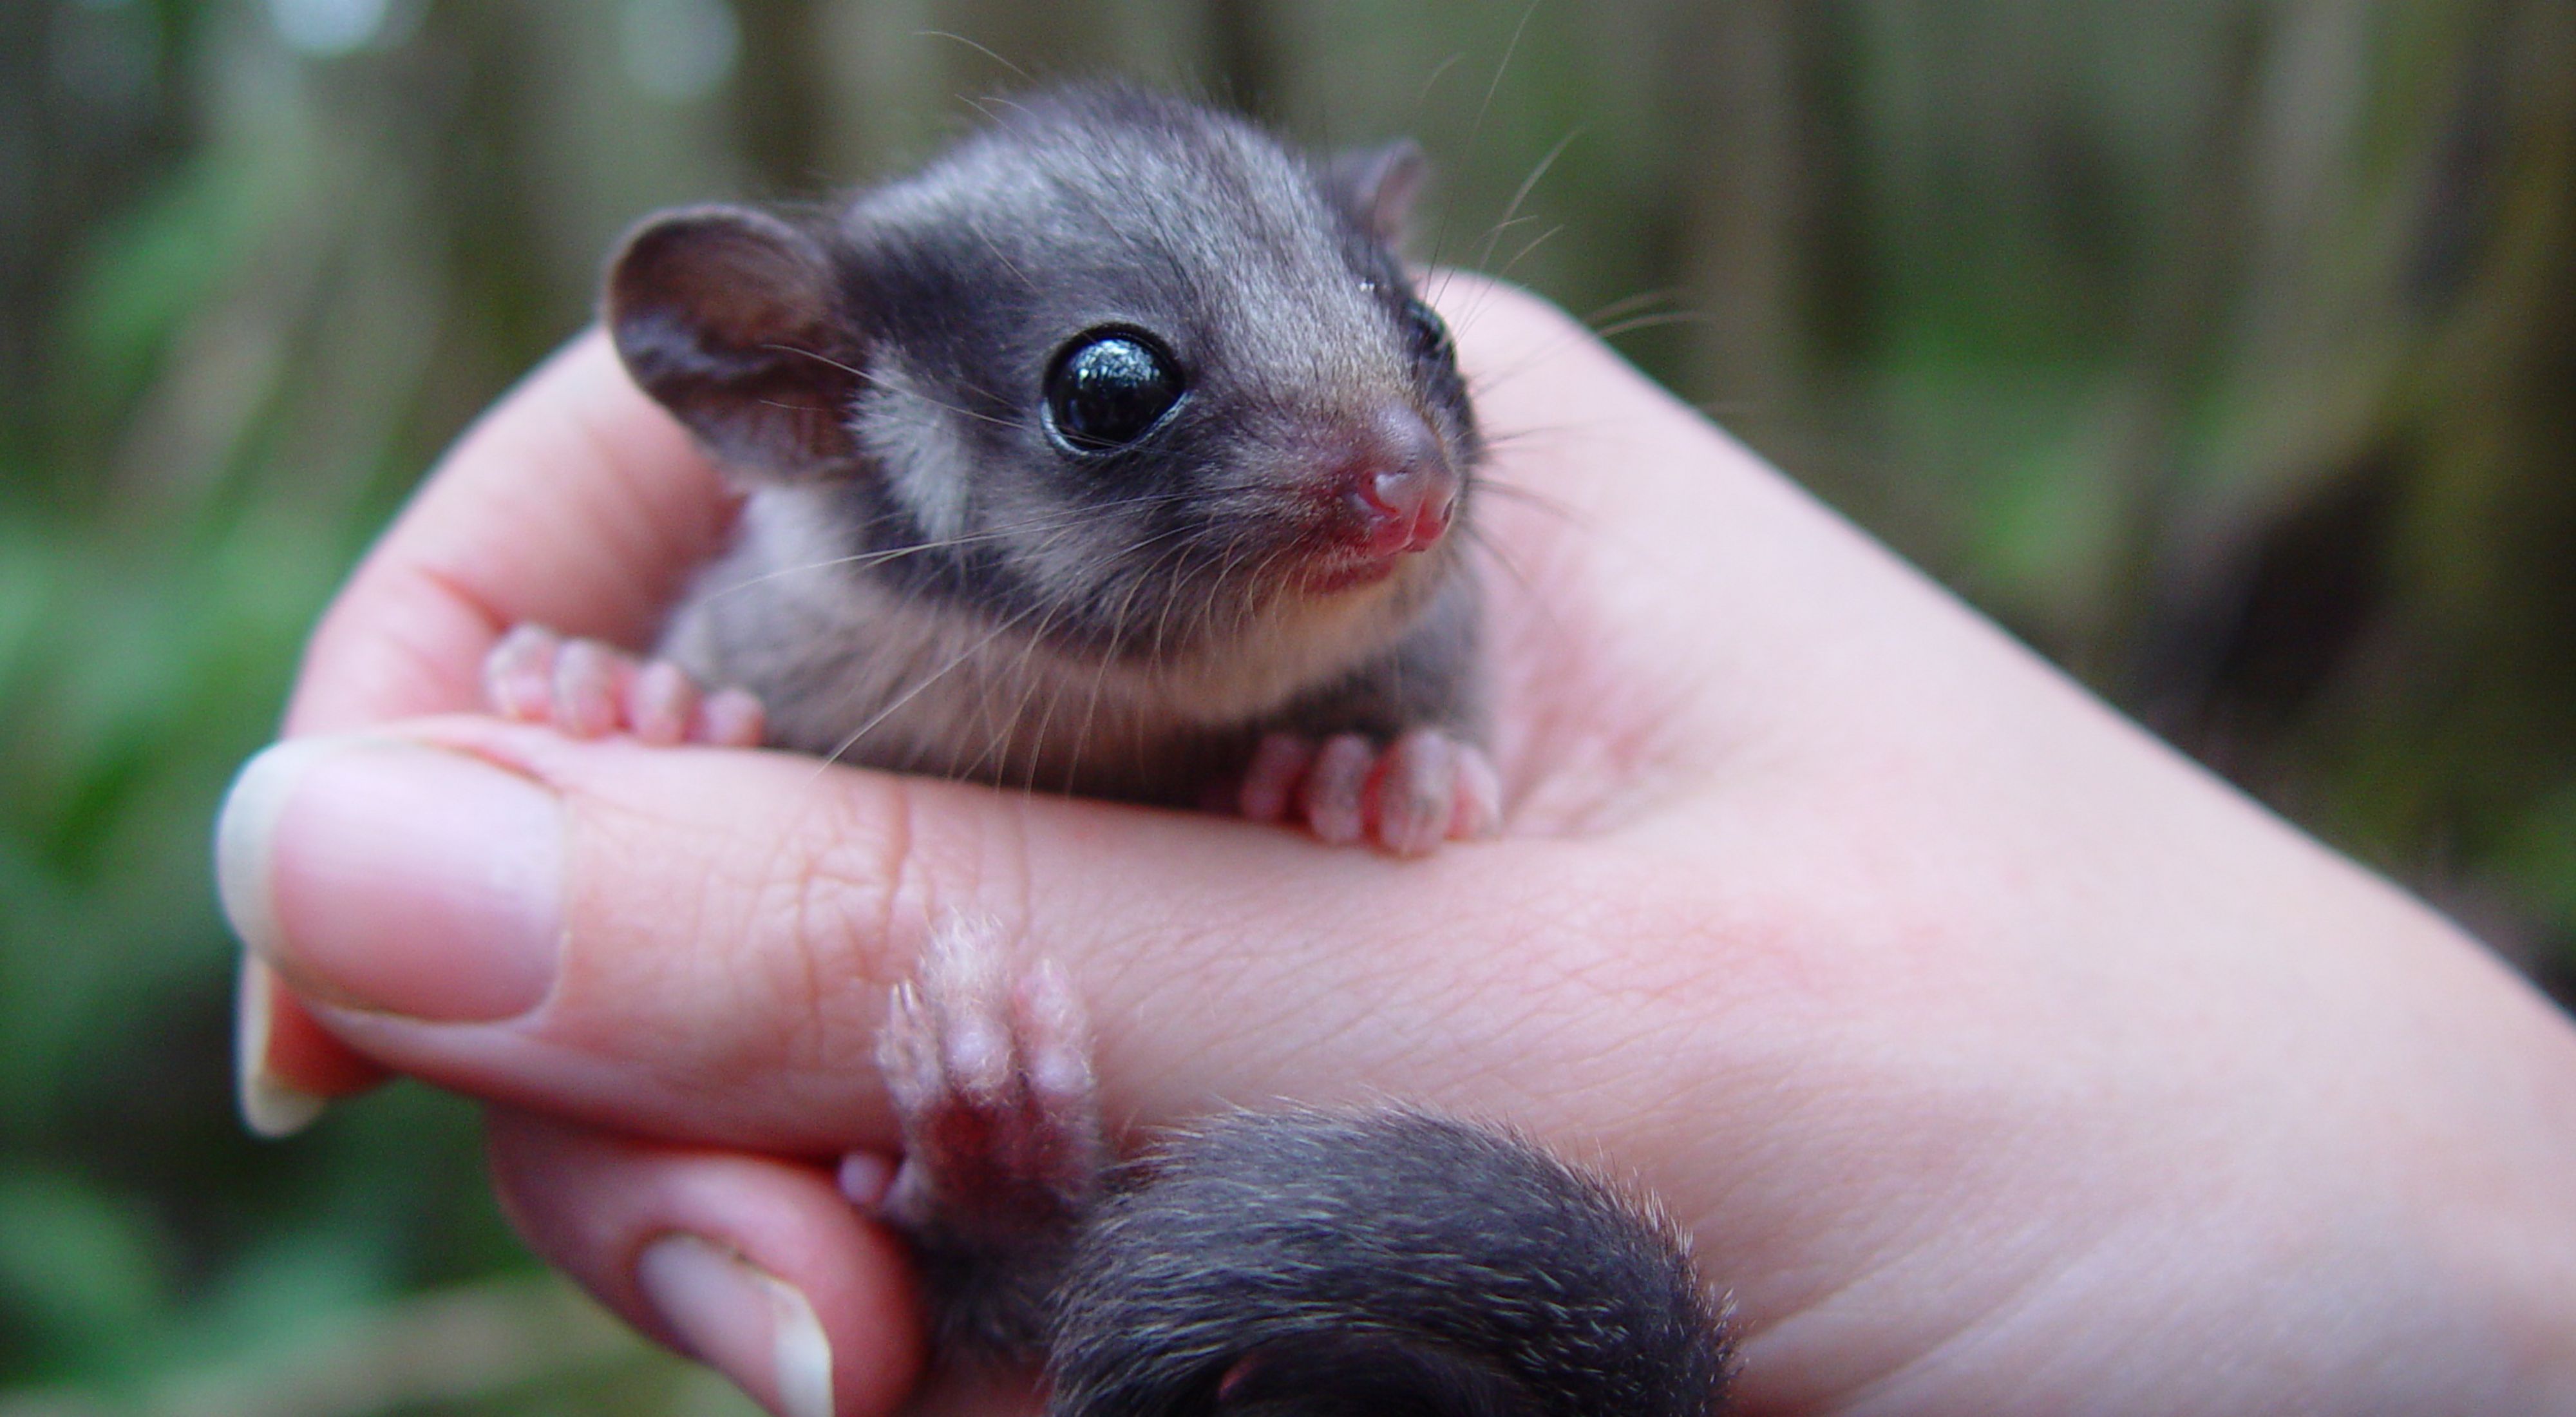 is a critically endangered possum largely restricted to small pockets of alpine ash, mountain ash, and snow gum forests in the Central Highlands of Victoria